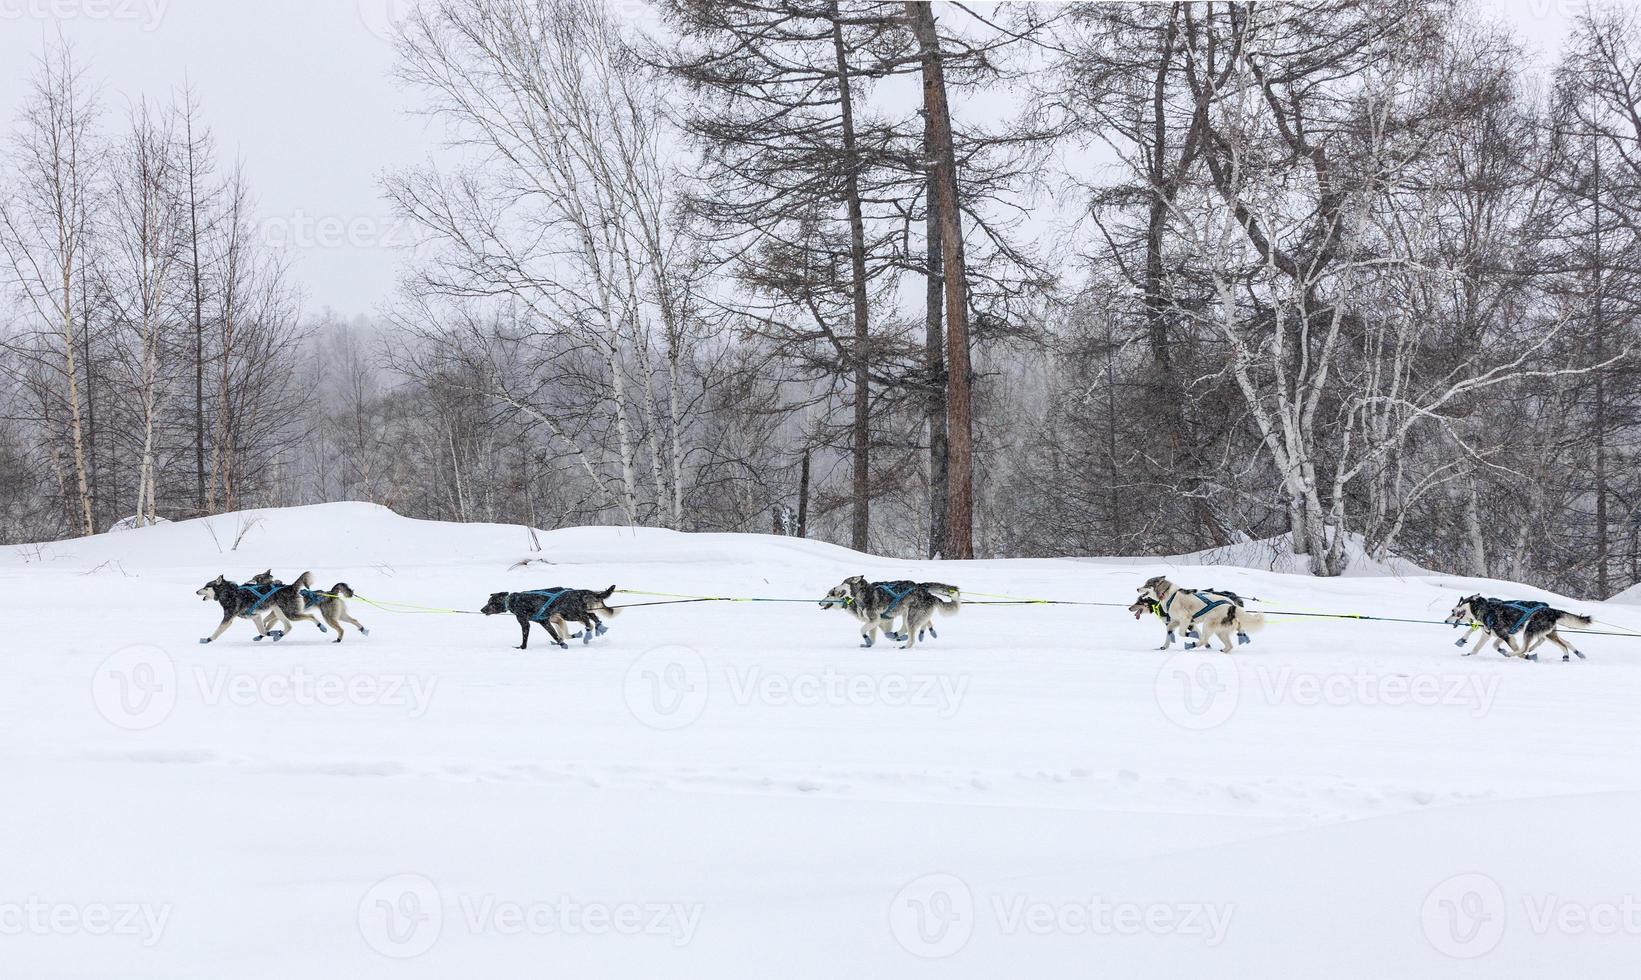 The dog sled running on a winter landscape photo